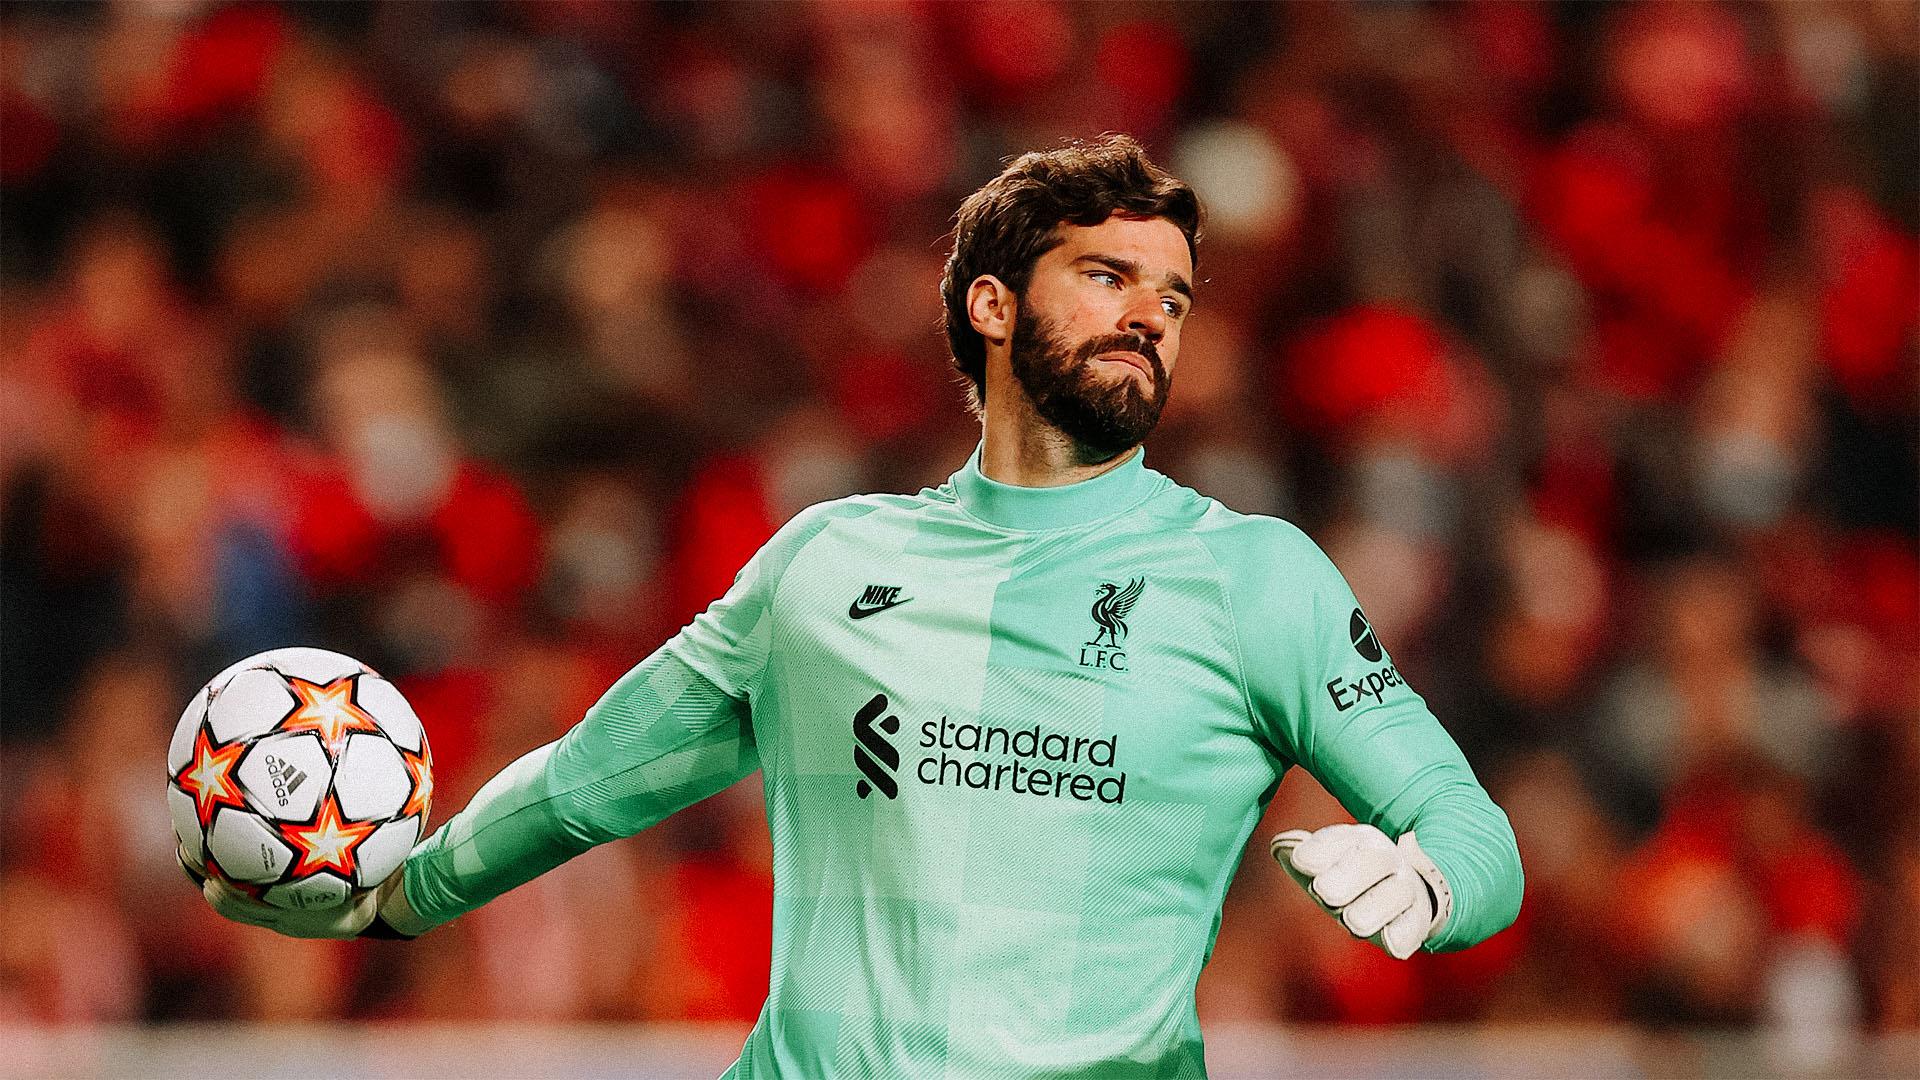 Liverpool FC - Afternoon, Alisson Becker 👋